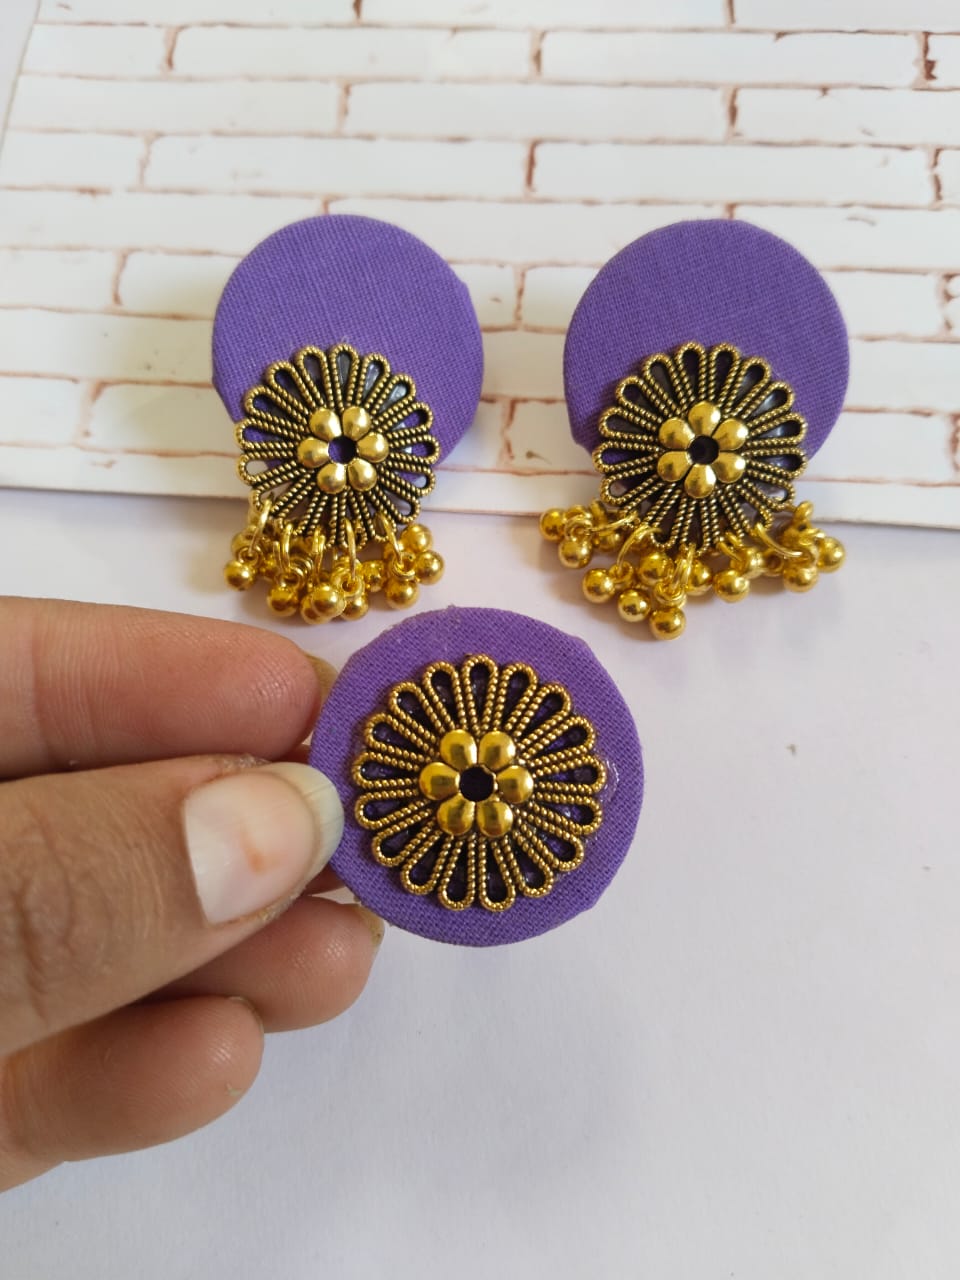 Purple earrings and ring in round shapes with golden charms on white grey backdrop